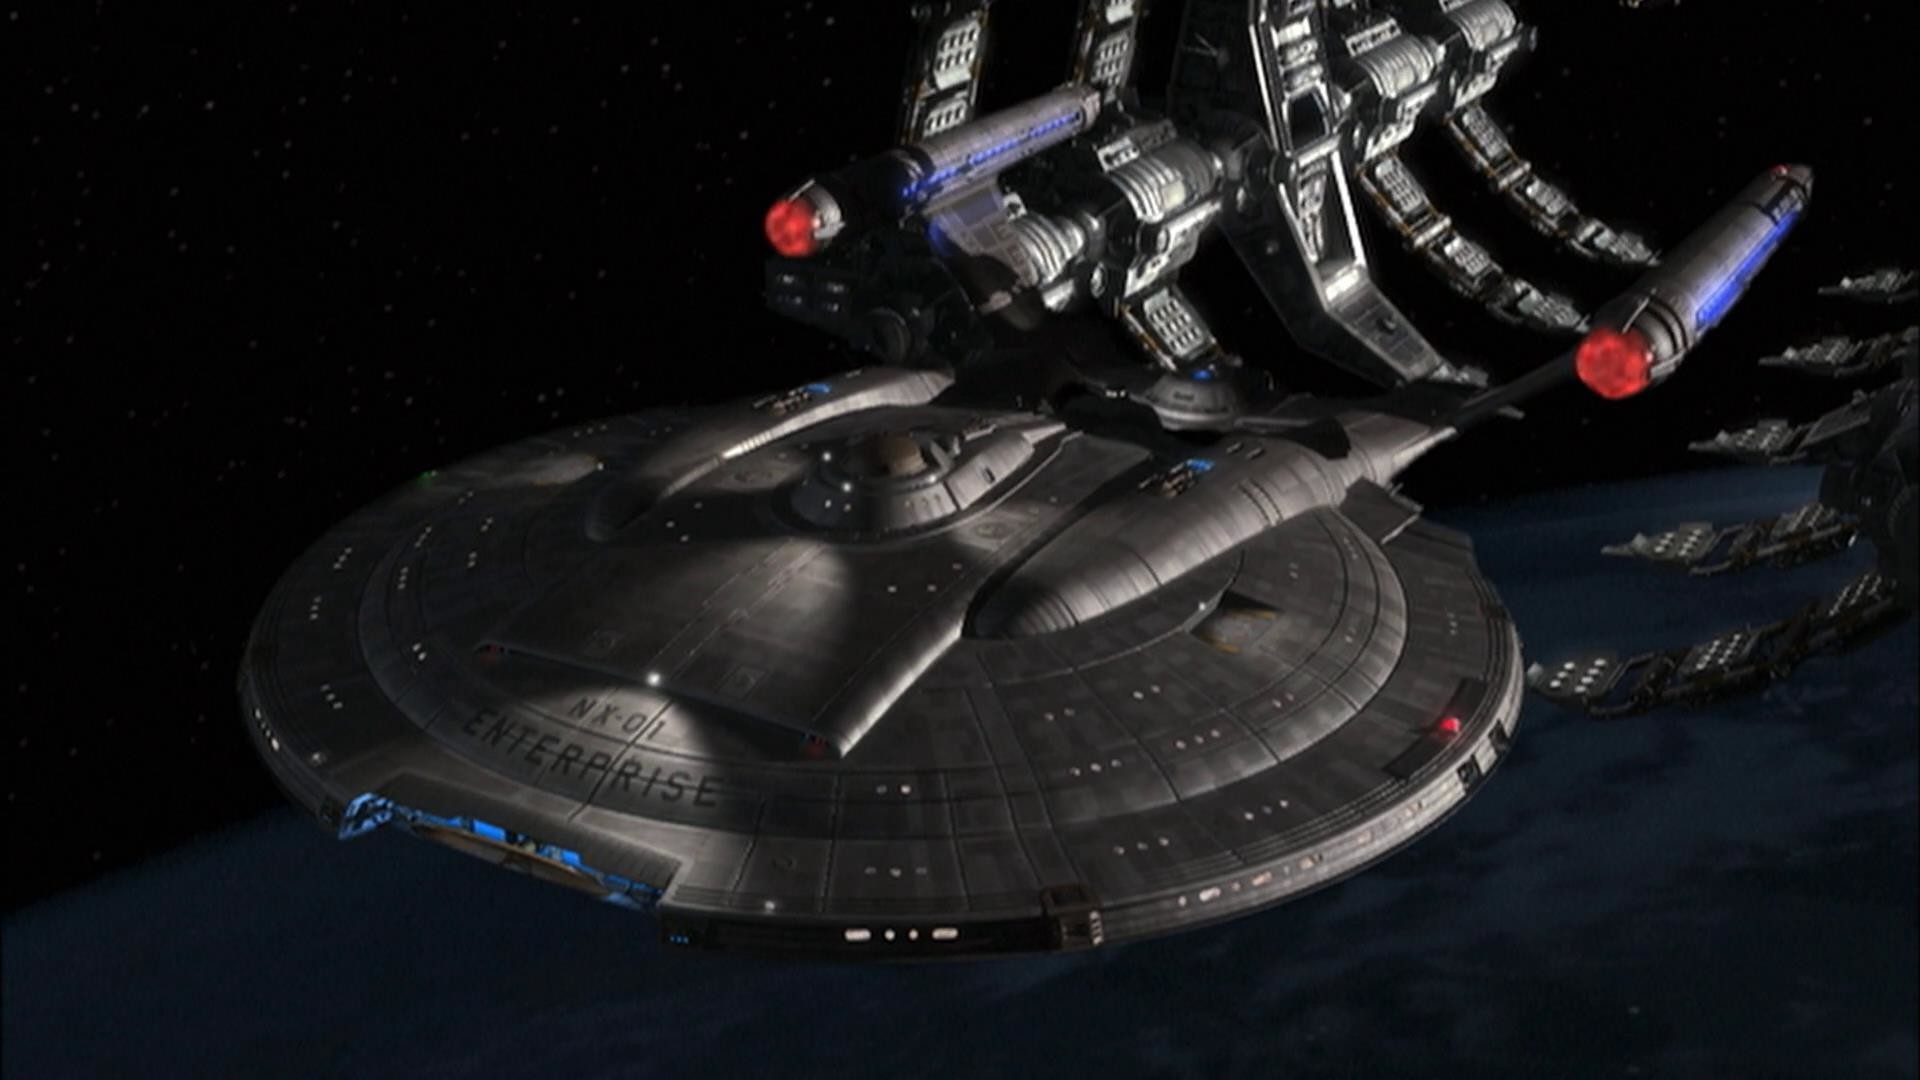 1920x1080 Star Trek Enterprise Wallpapers - Wallpaper Cave Earths first Warp Five  Starship the Enterprise NX 01 Captained by .